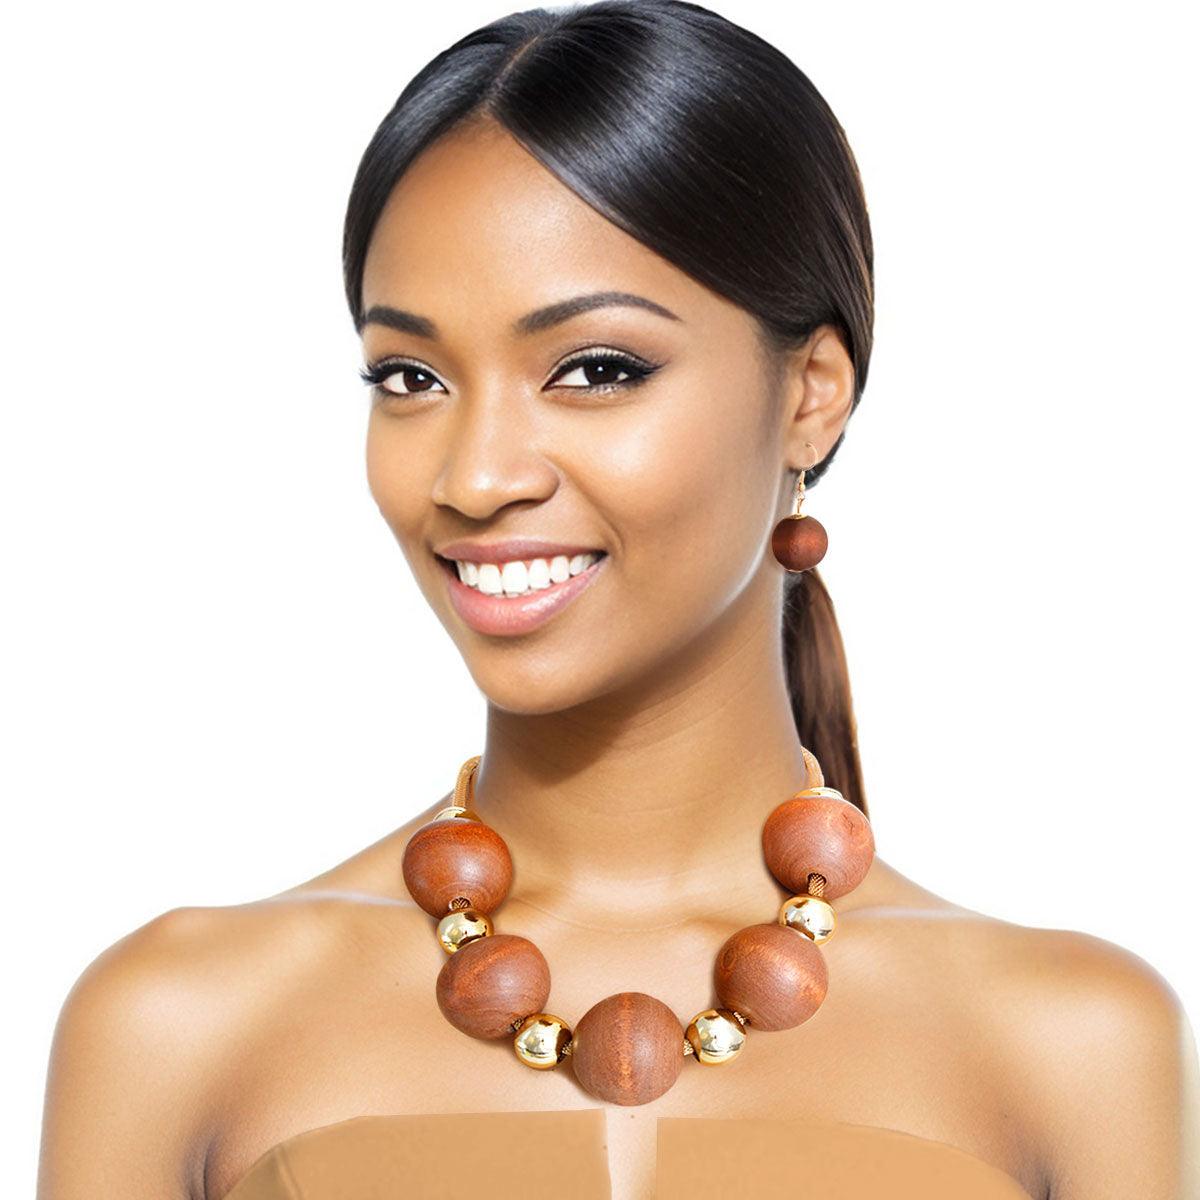 Nature's Best: Unique Wood Bead Necklace & Earrings Set for You